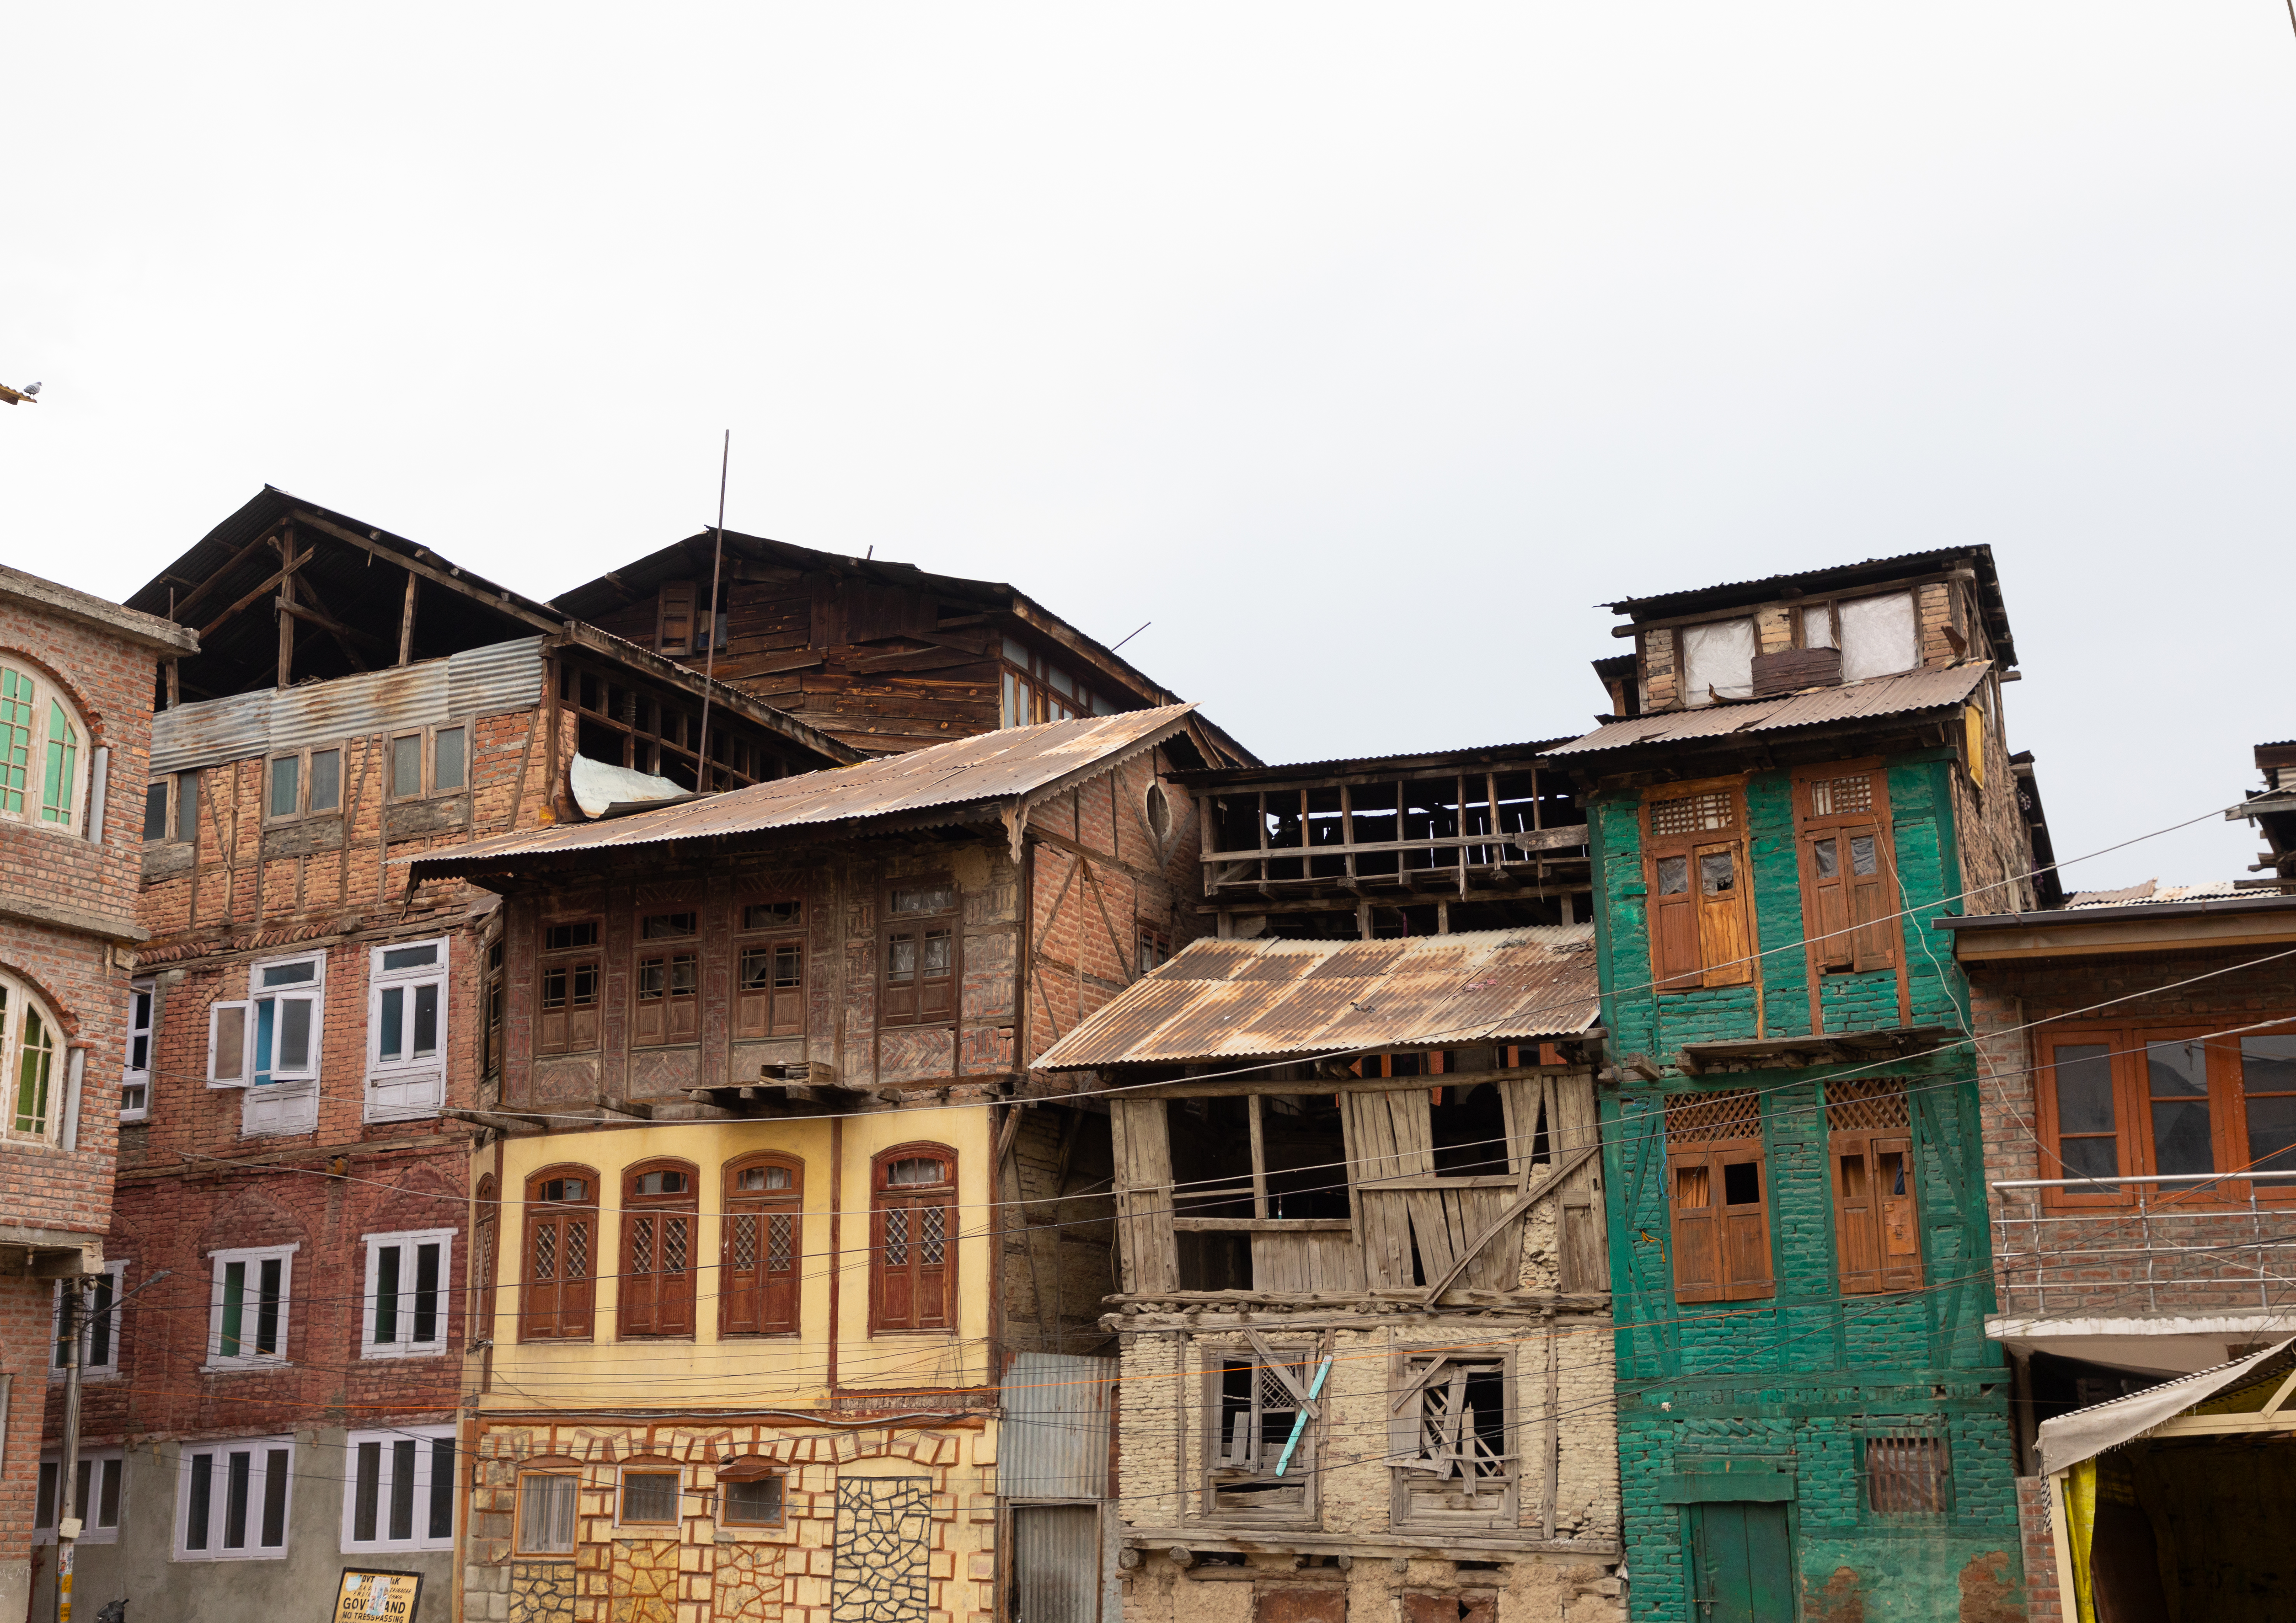 Ancient colouful wooden facades in Srinagar Old Town